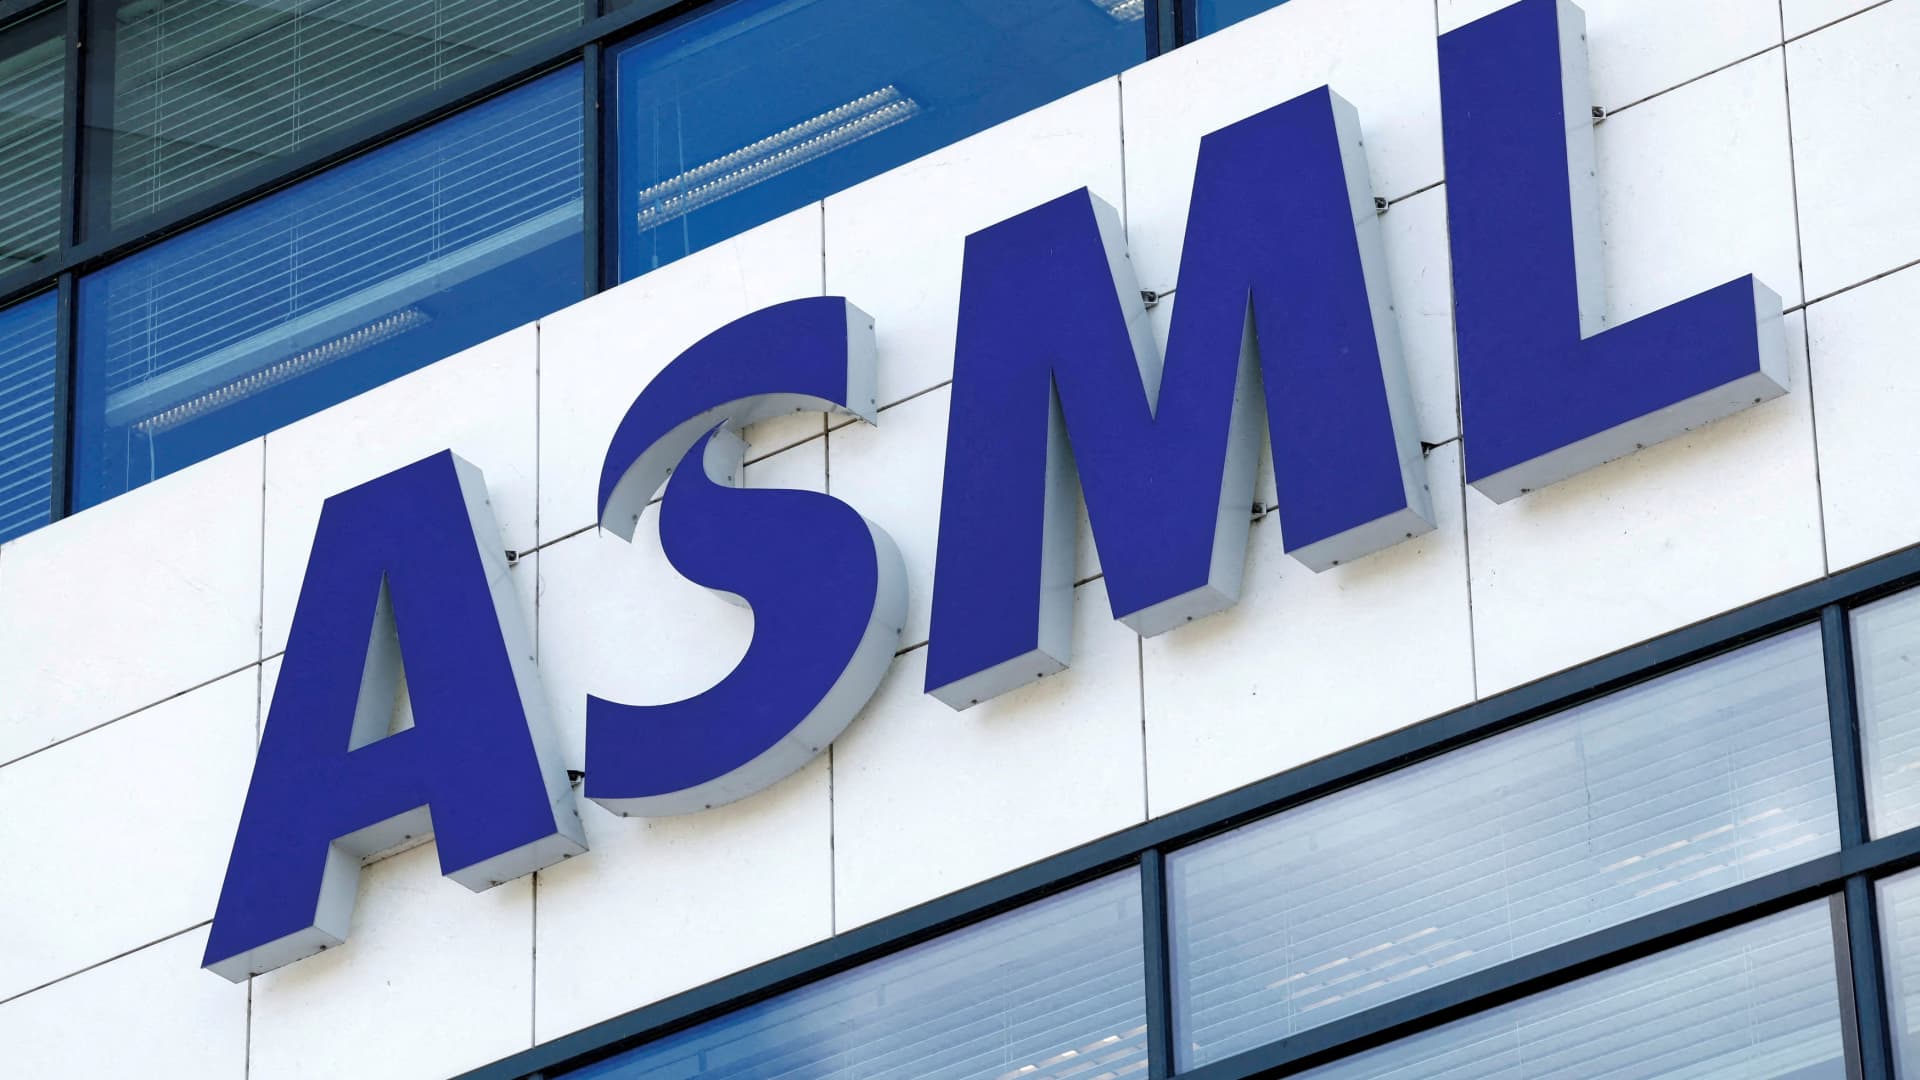 Dutch minister confident chip firm ASML will stay in the Netherlands